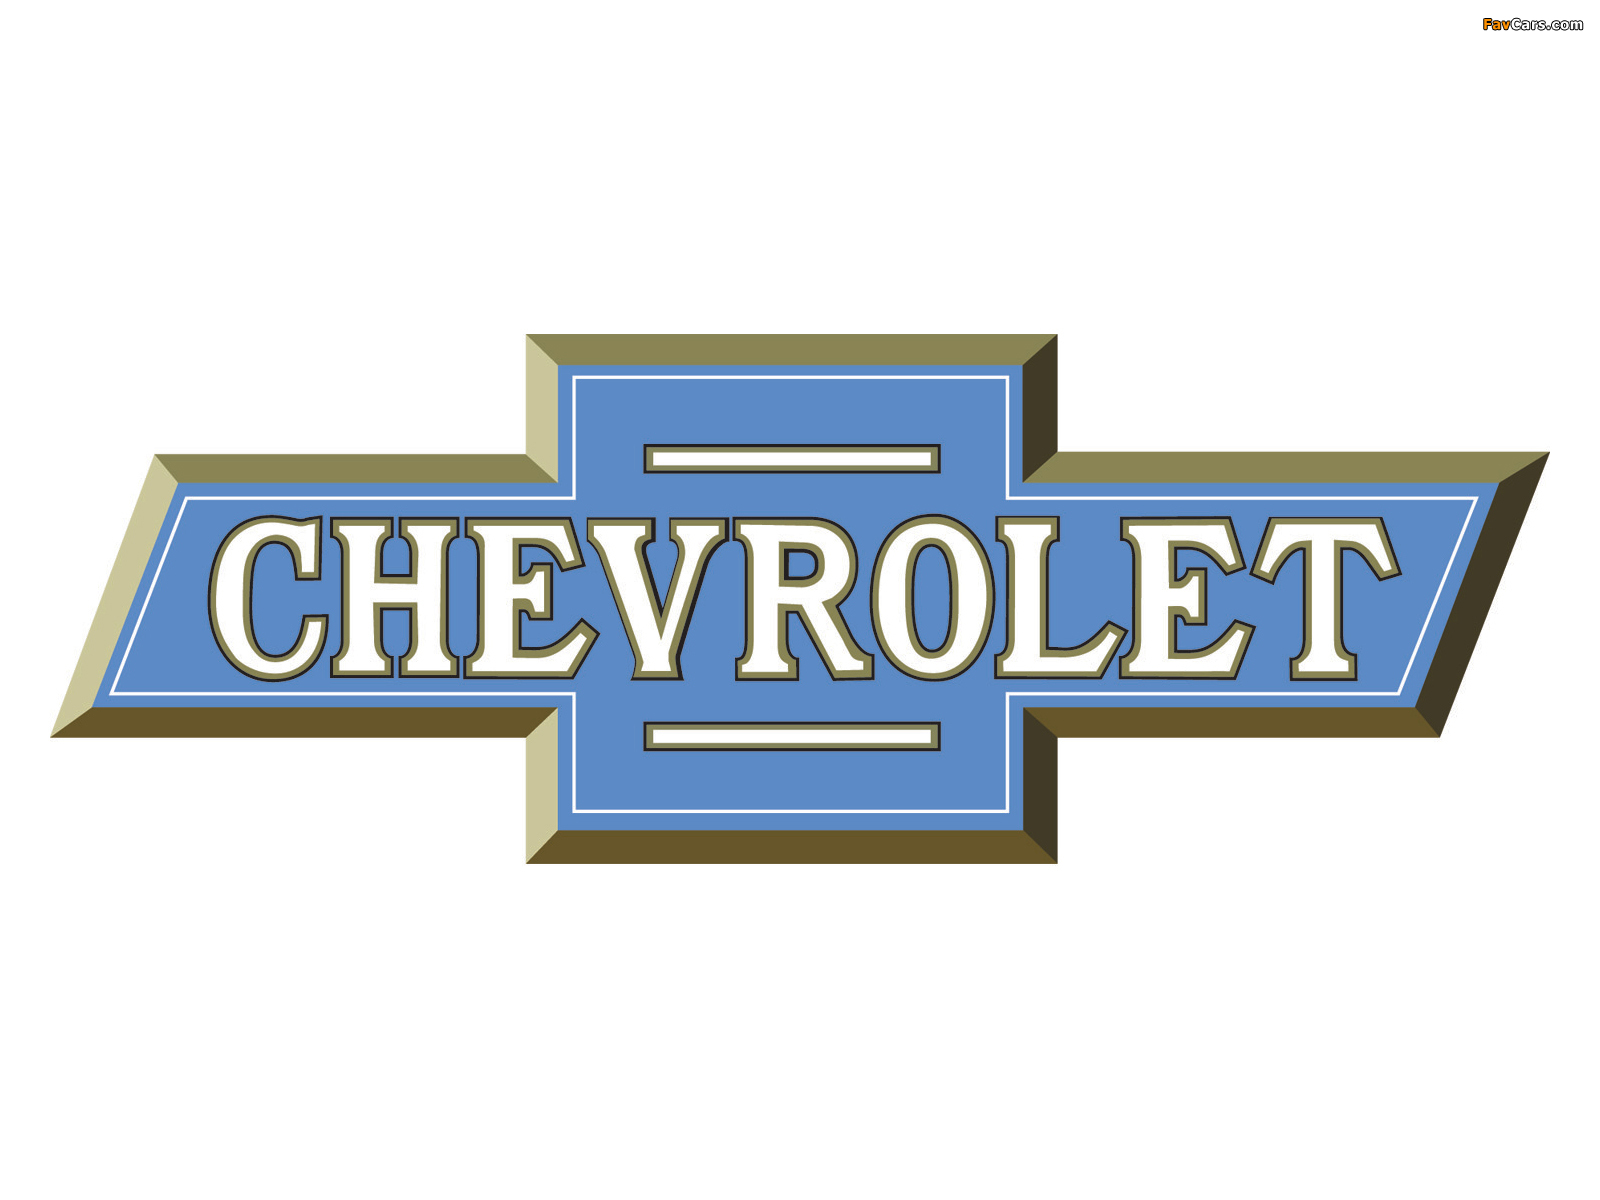 Images of  Chevrolet (1600 x 1200)